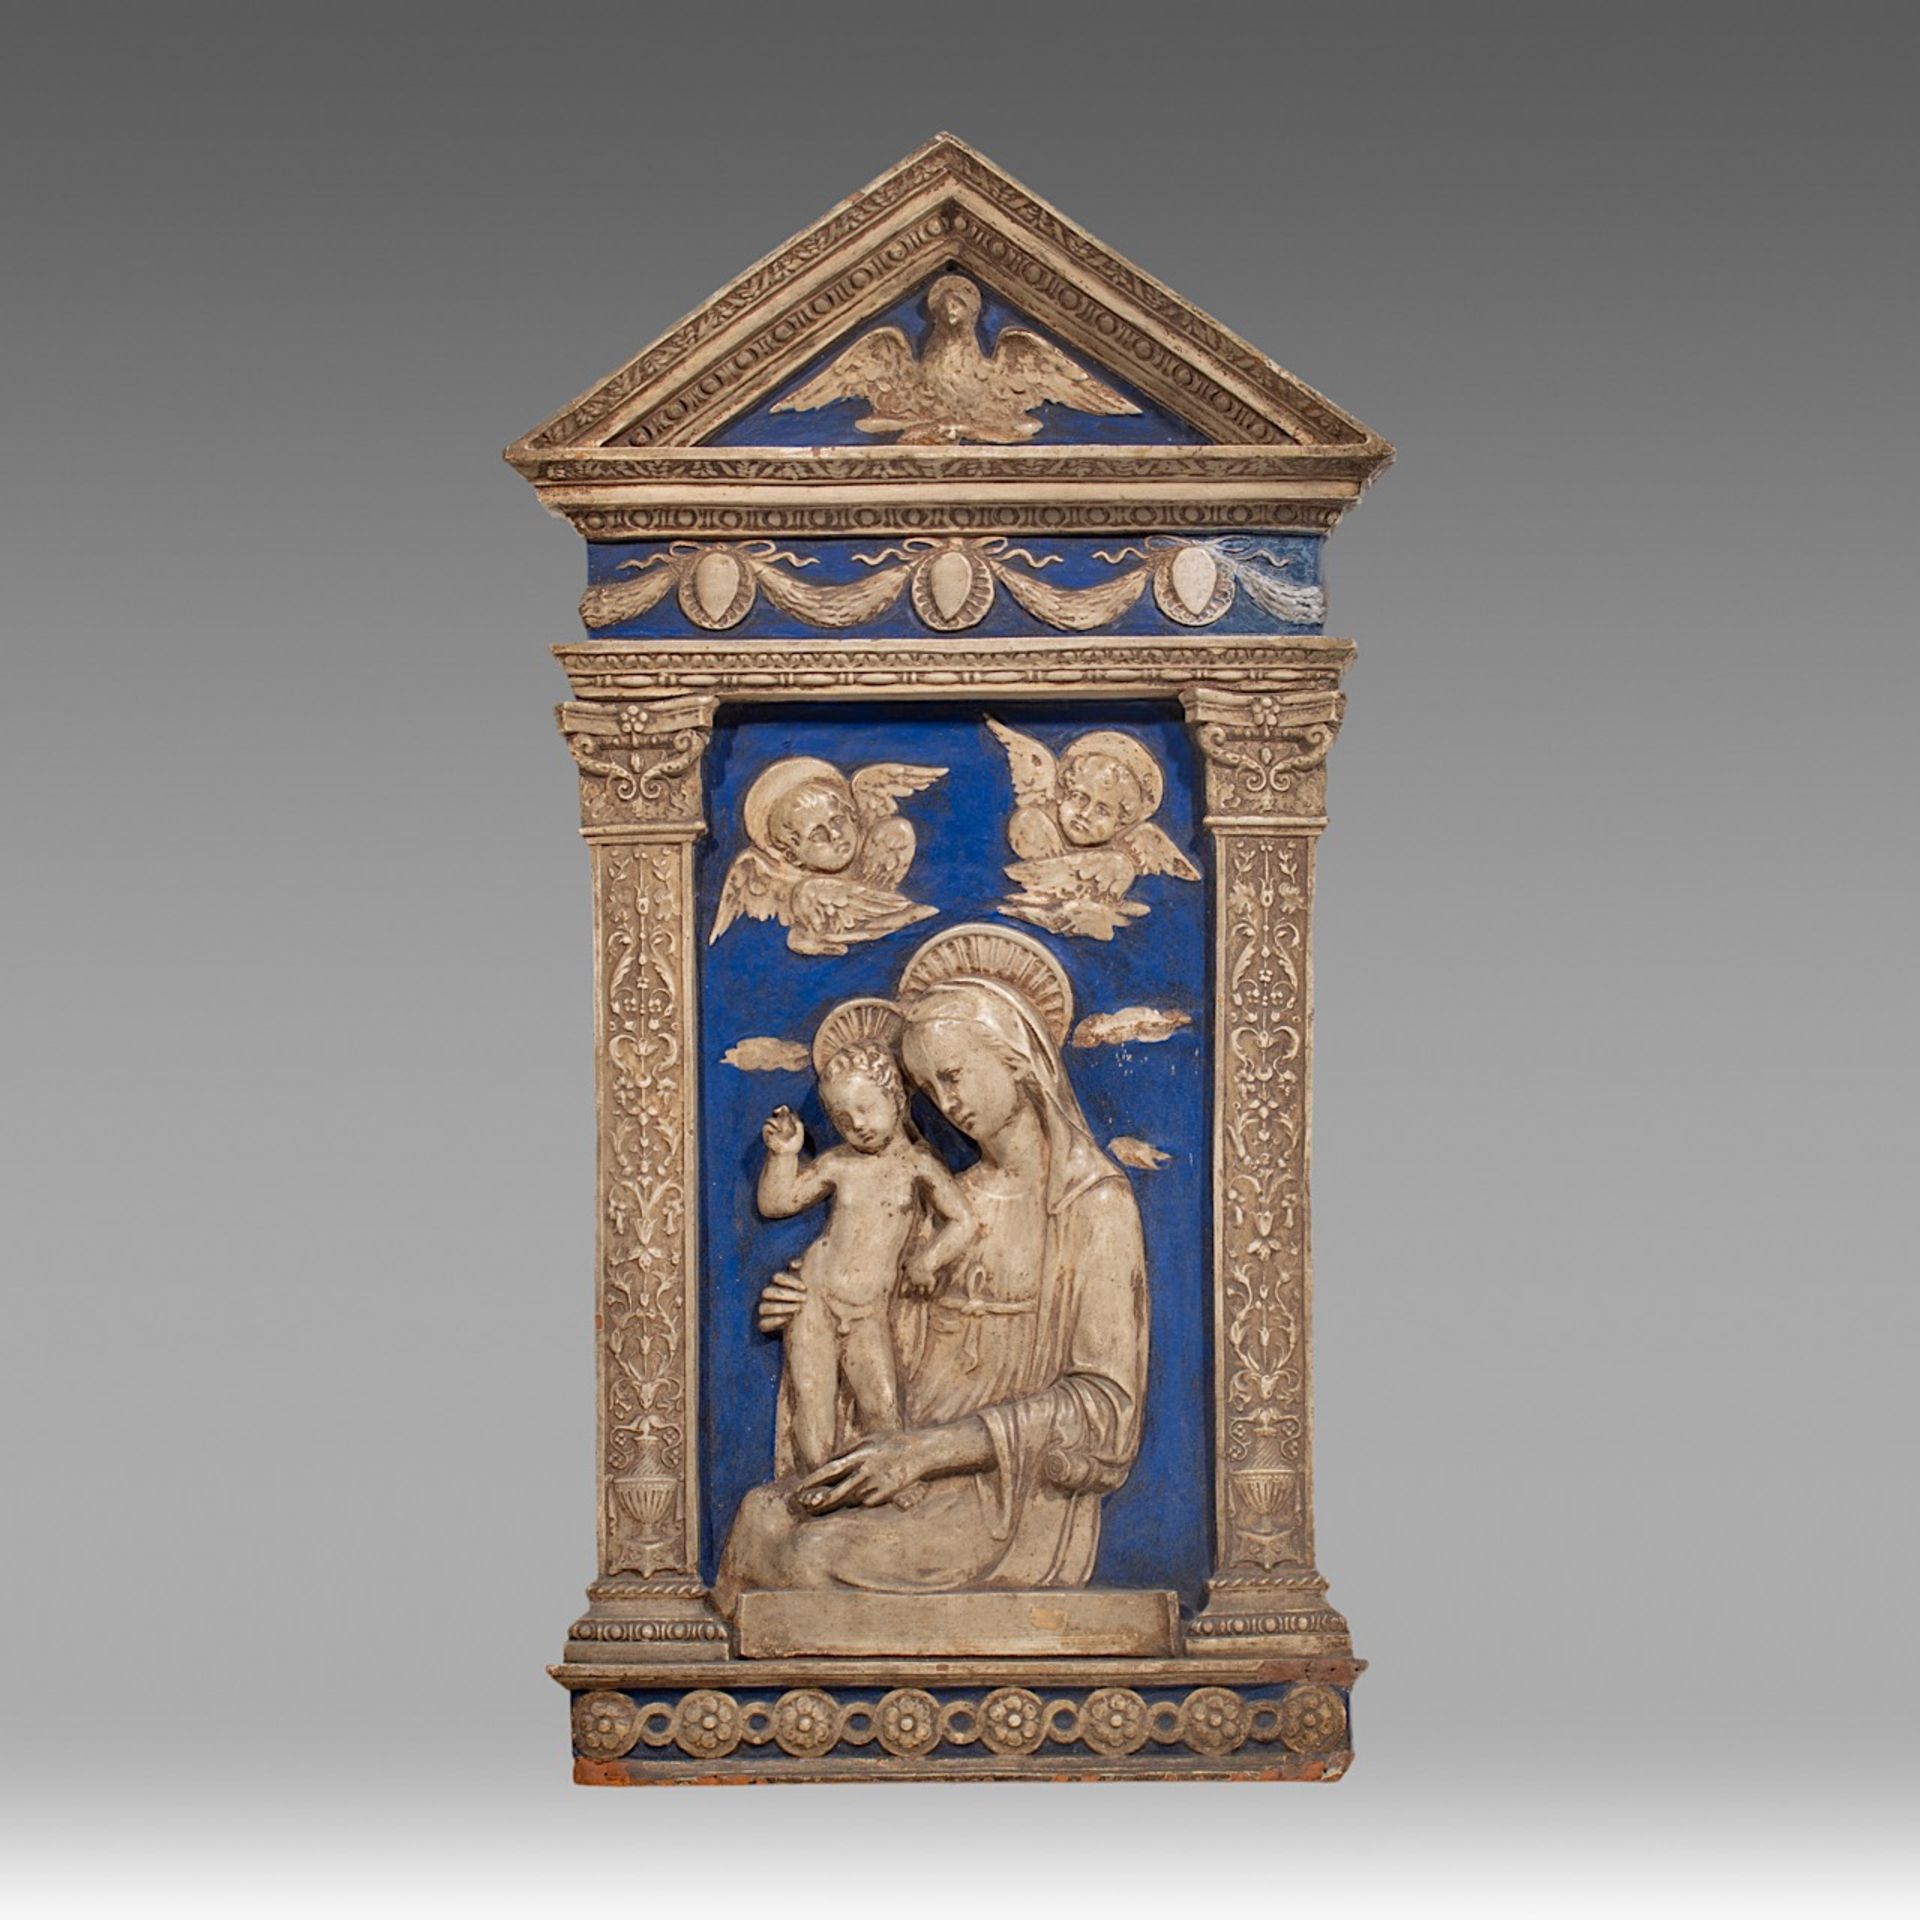 A blue and white glazed terracotta relief of the Virgin and Child in the Della Robbia manner or a fo